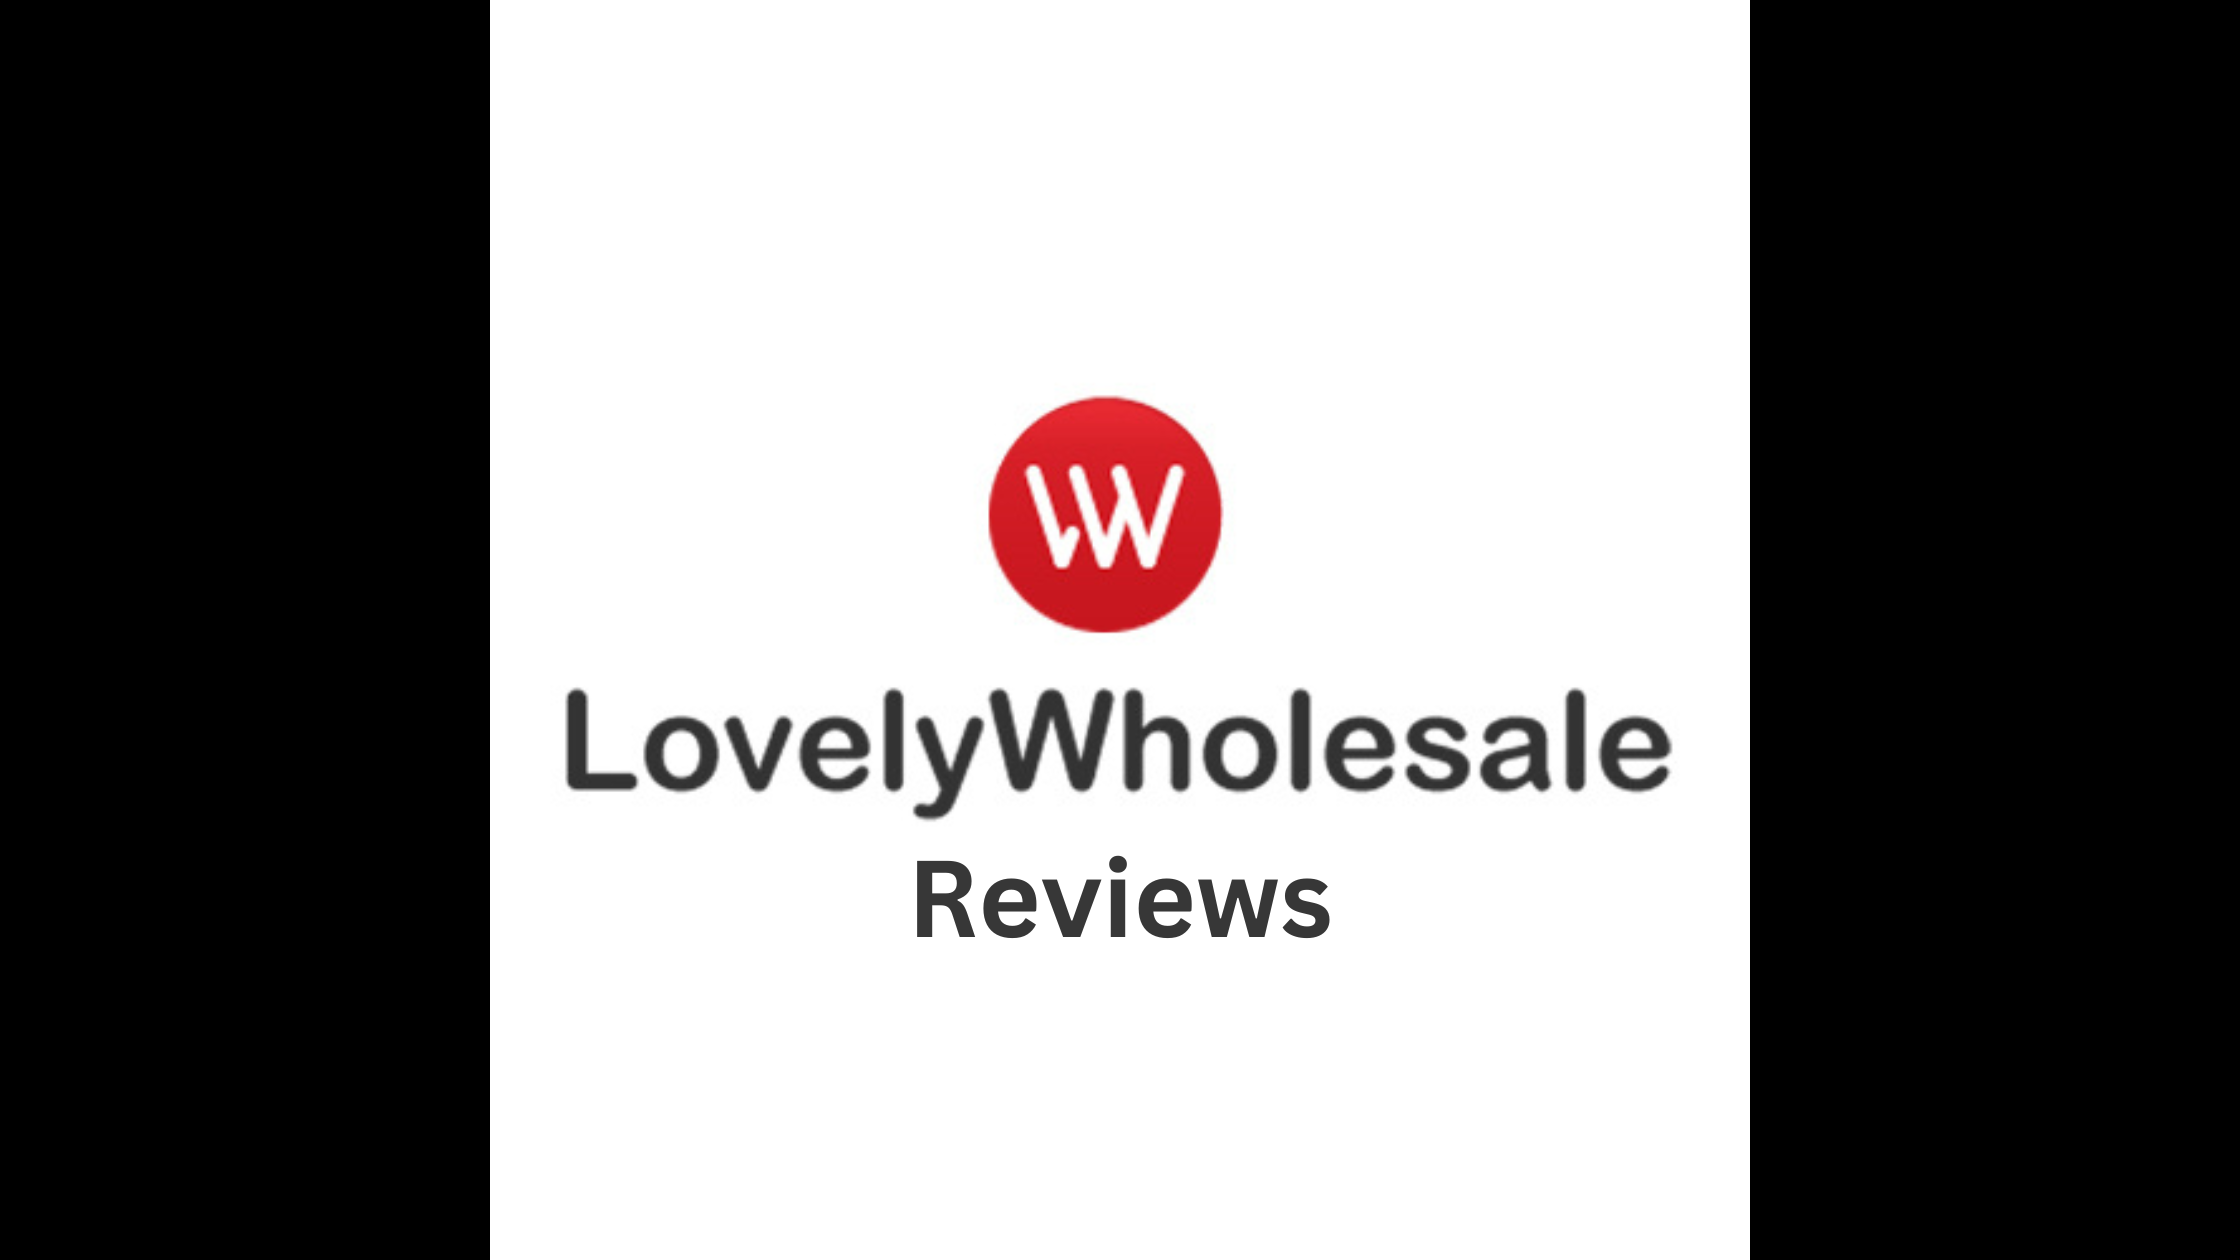 LovelyWholesale Reviews: What Shoppers Need to Know Before Buying